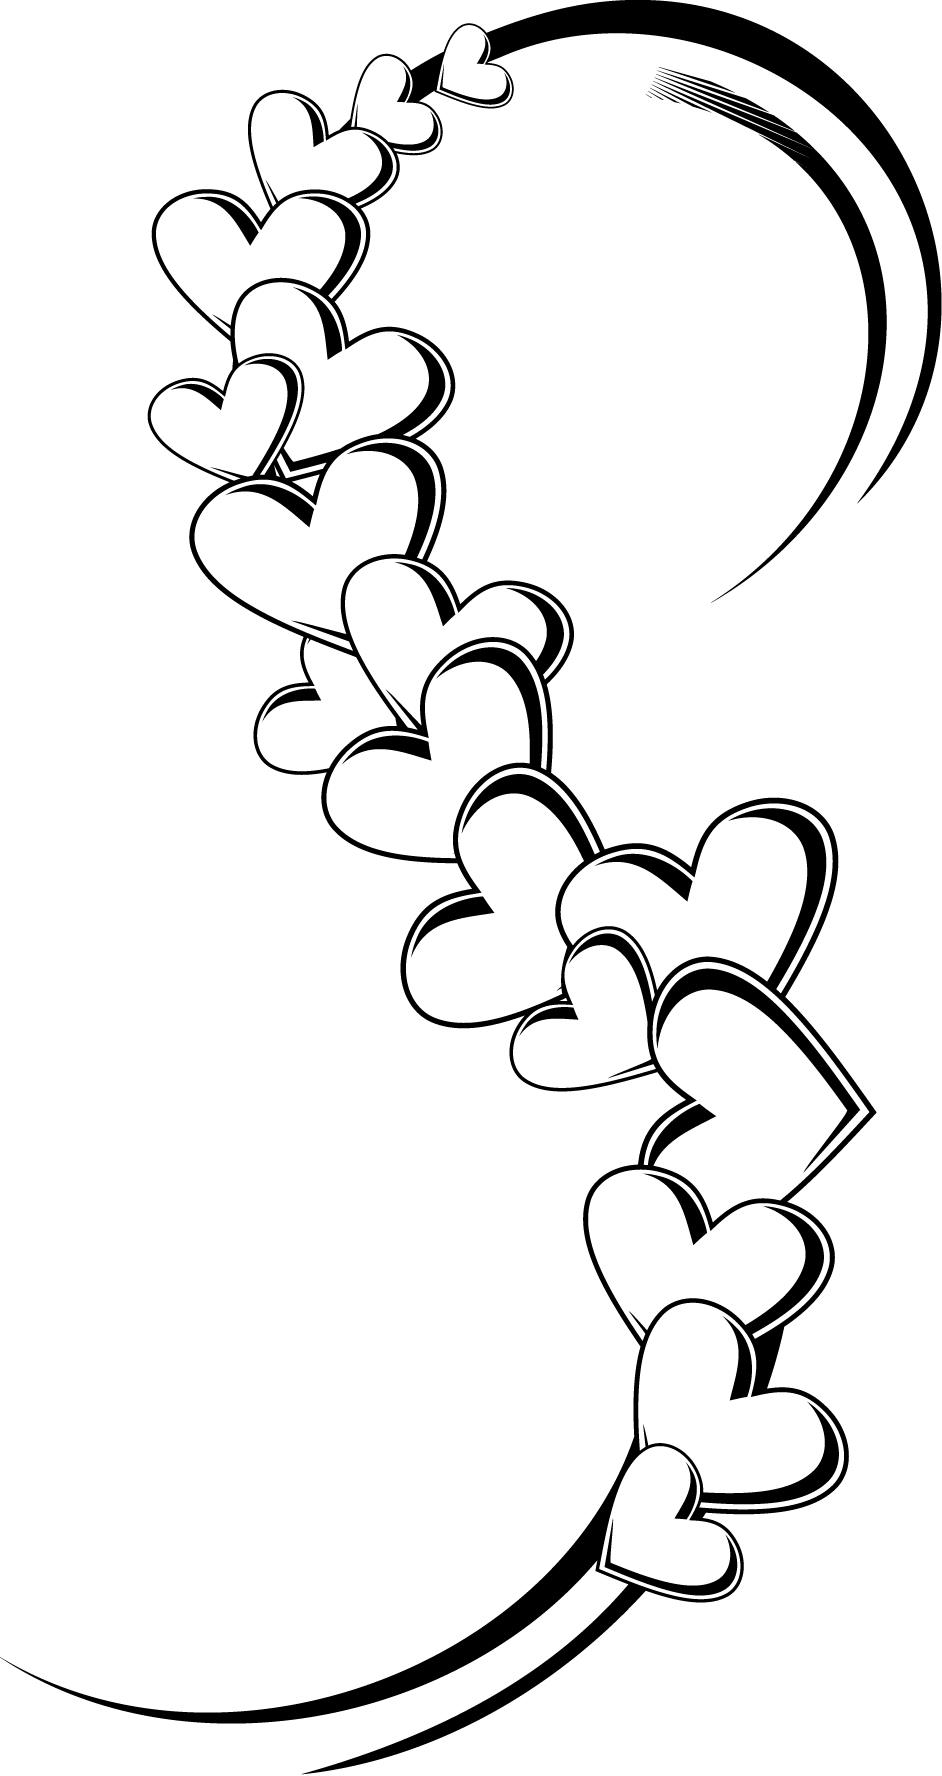 coloring pages of a hearts tattoo designs - Coloring Point ...